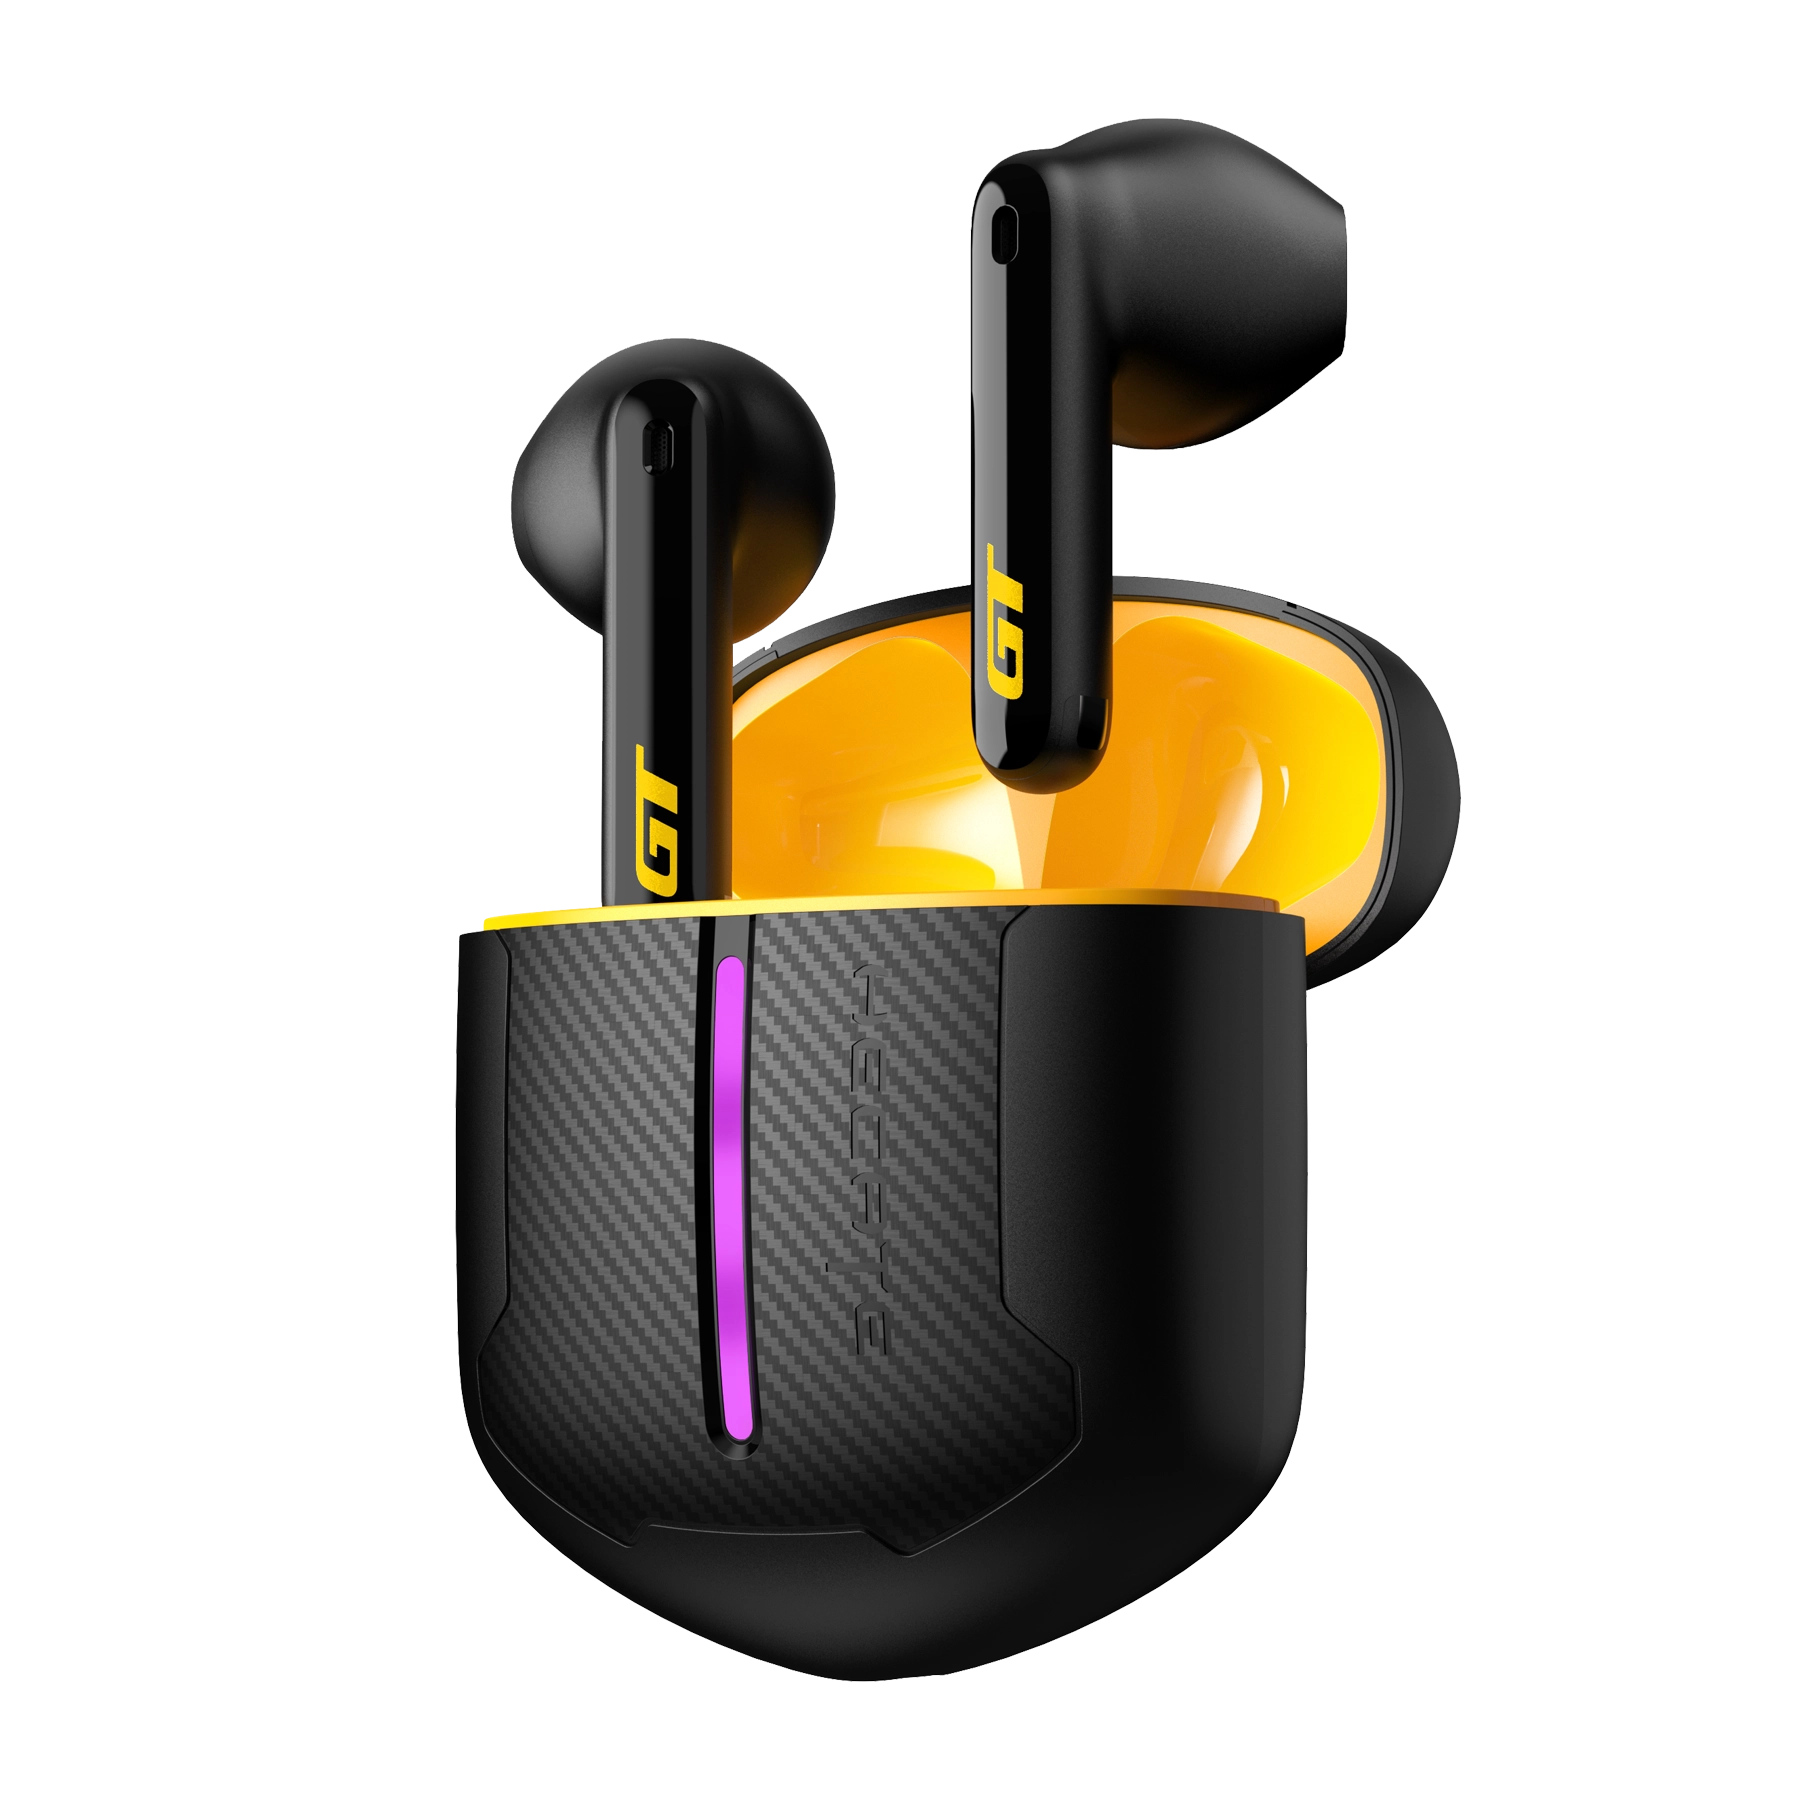 GT2 wireless earbuds Product Pictures black_yellow_1